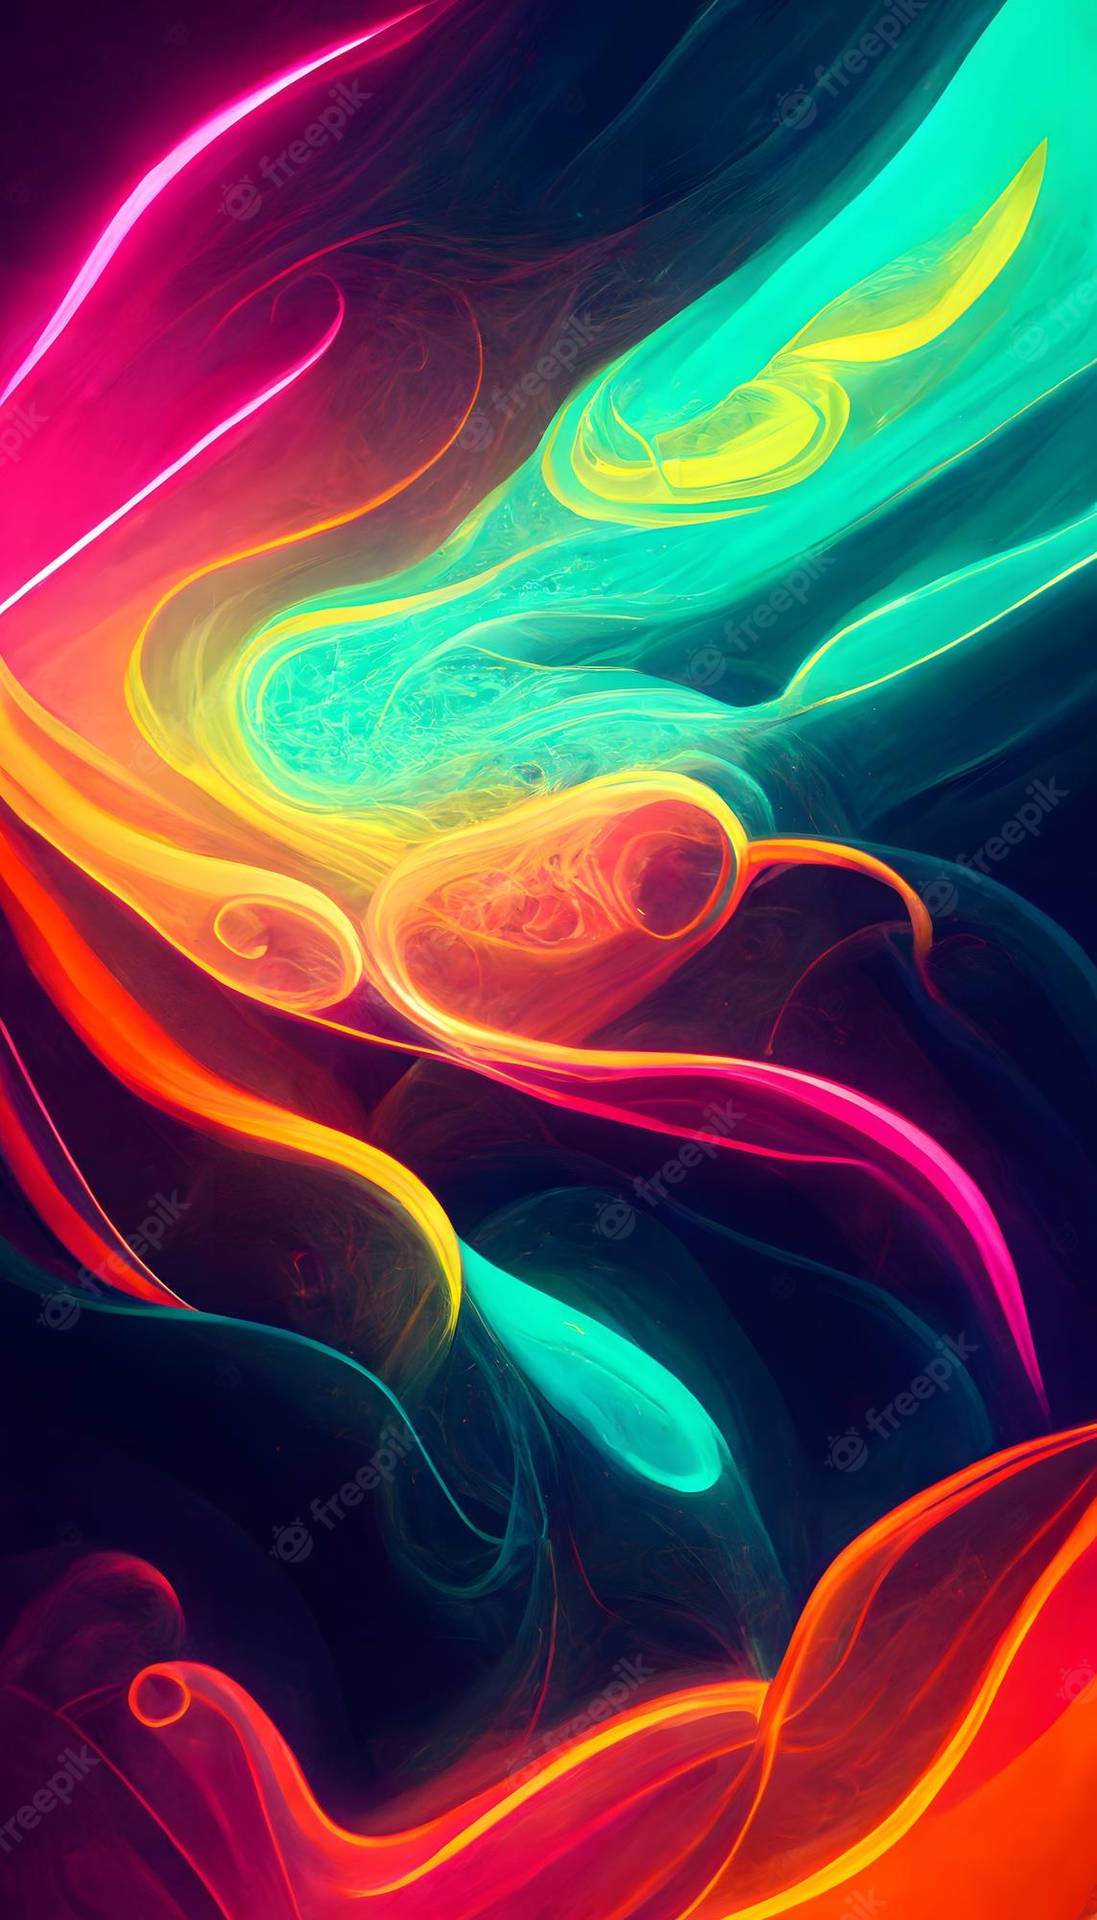 Free Colorful Amoled Wallpaper Downloads, [100+] Colorful Amoled Wallpapers  for FREE 